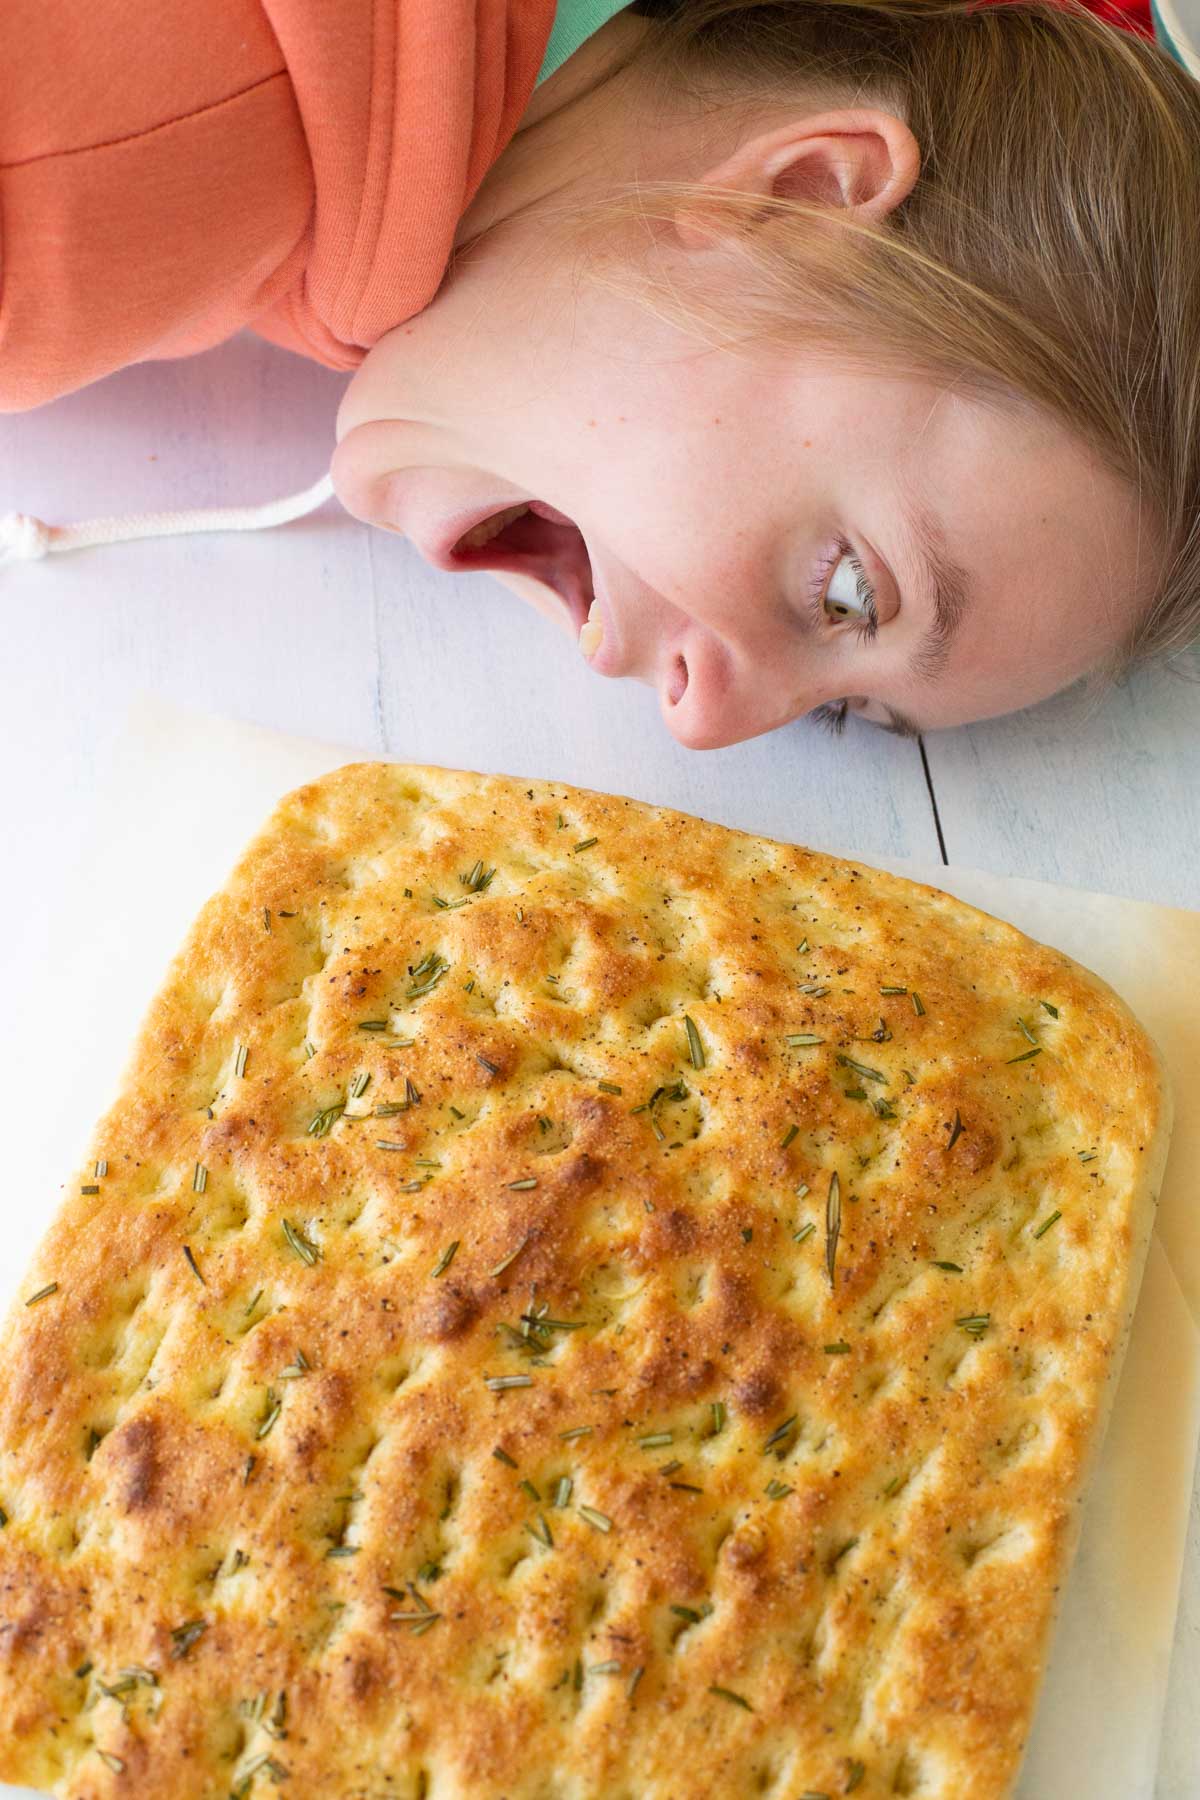 A young girl playfully tries to bite the entire focaccia bread.